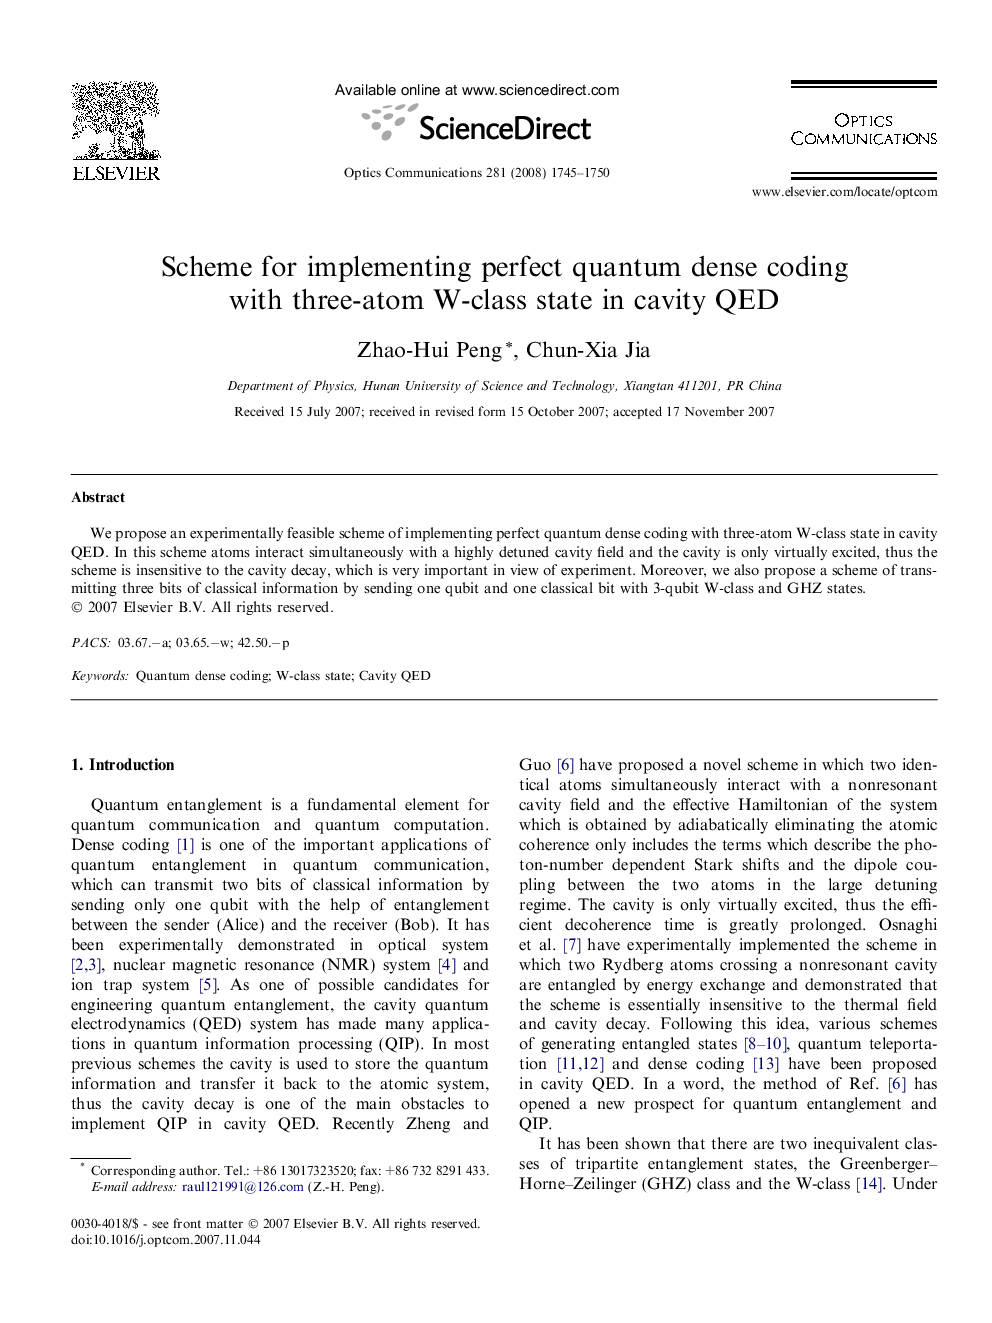 Scheme for implementing perfect quantum dense coding with three-atom W-class state in cavity QED